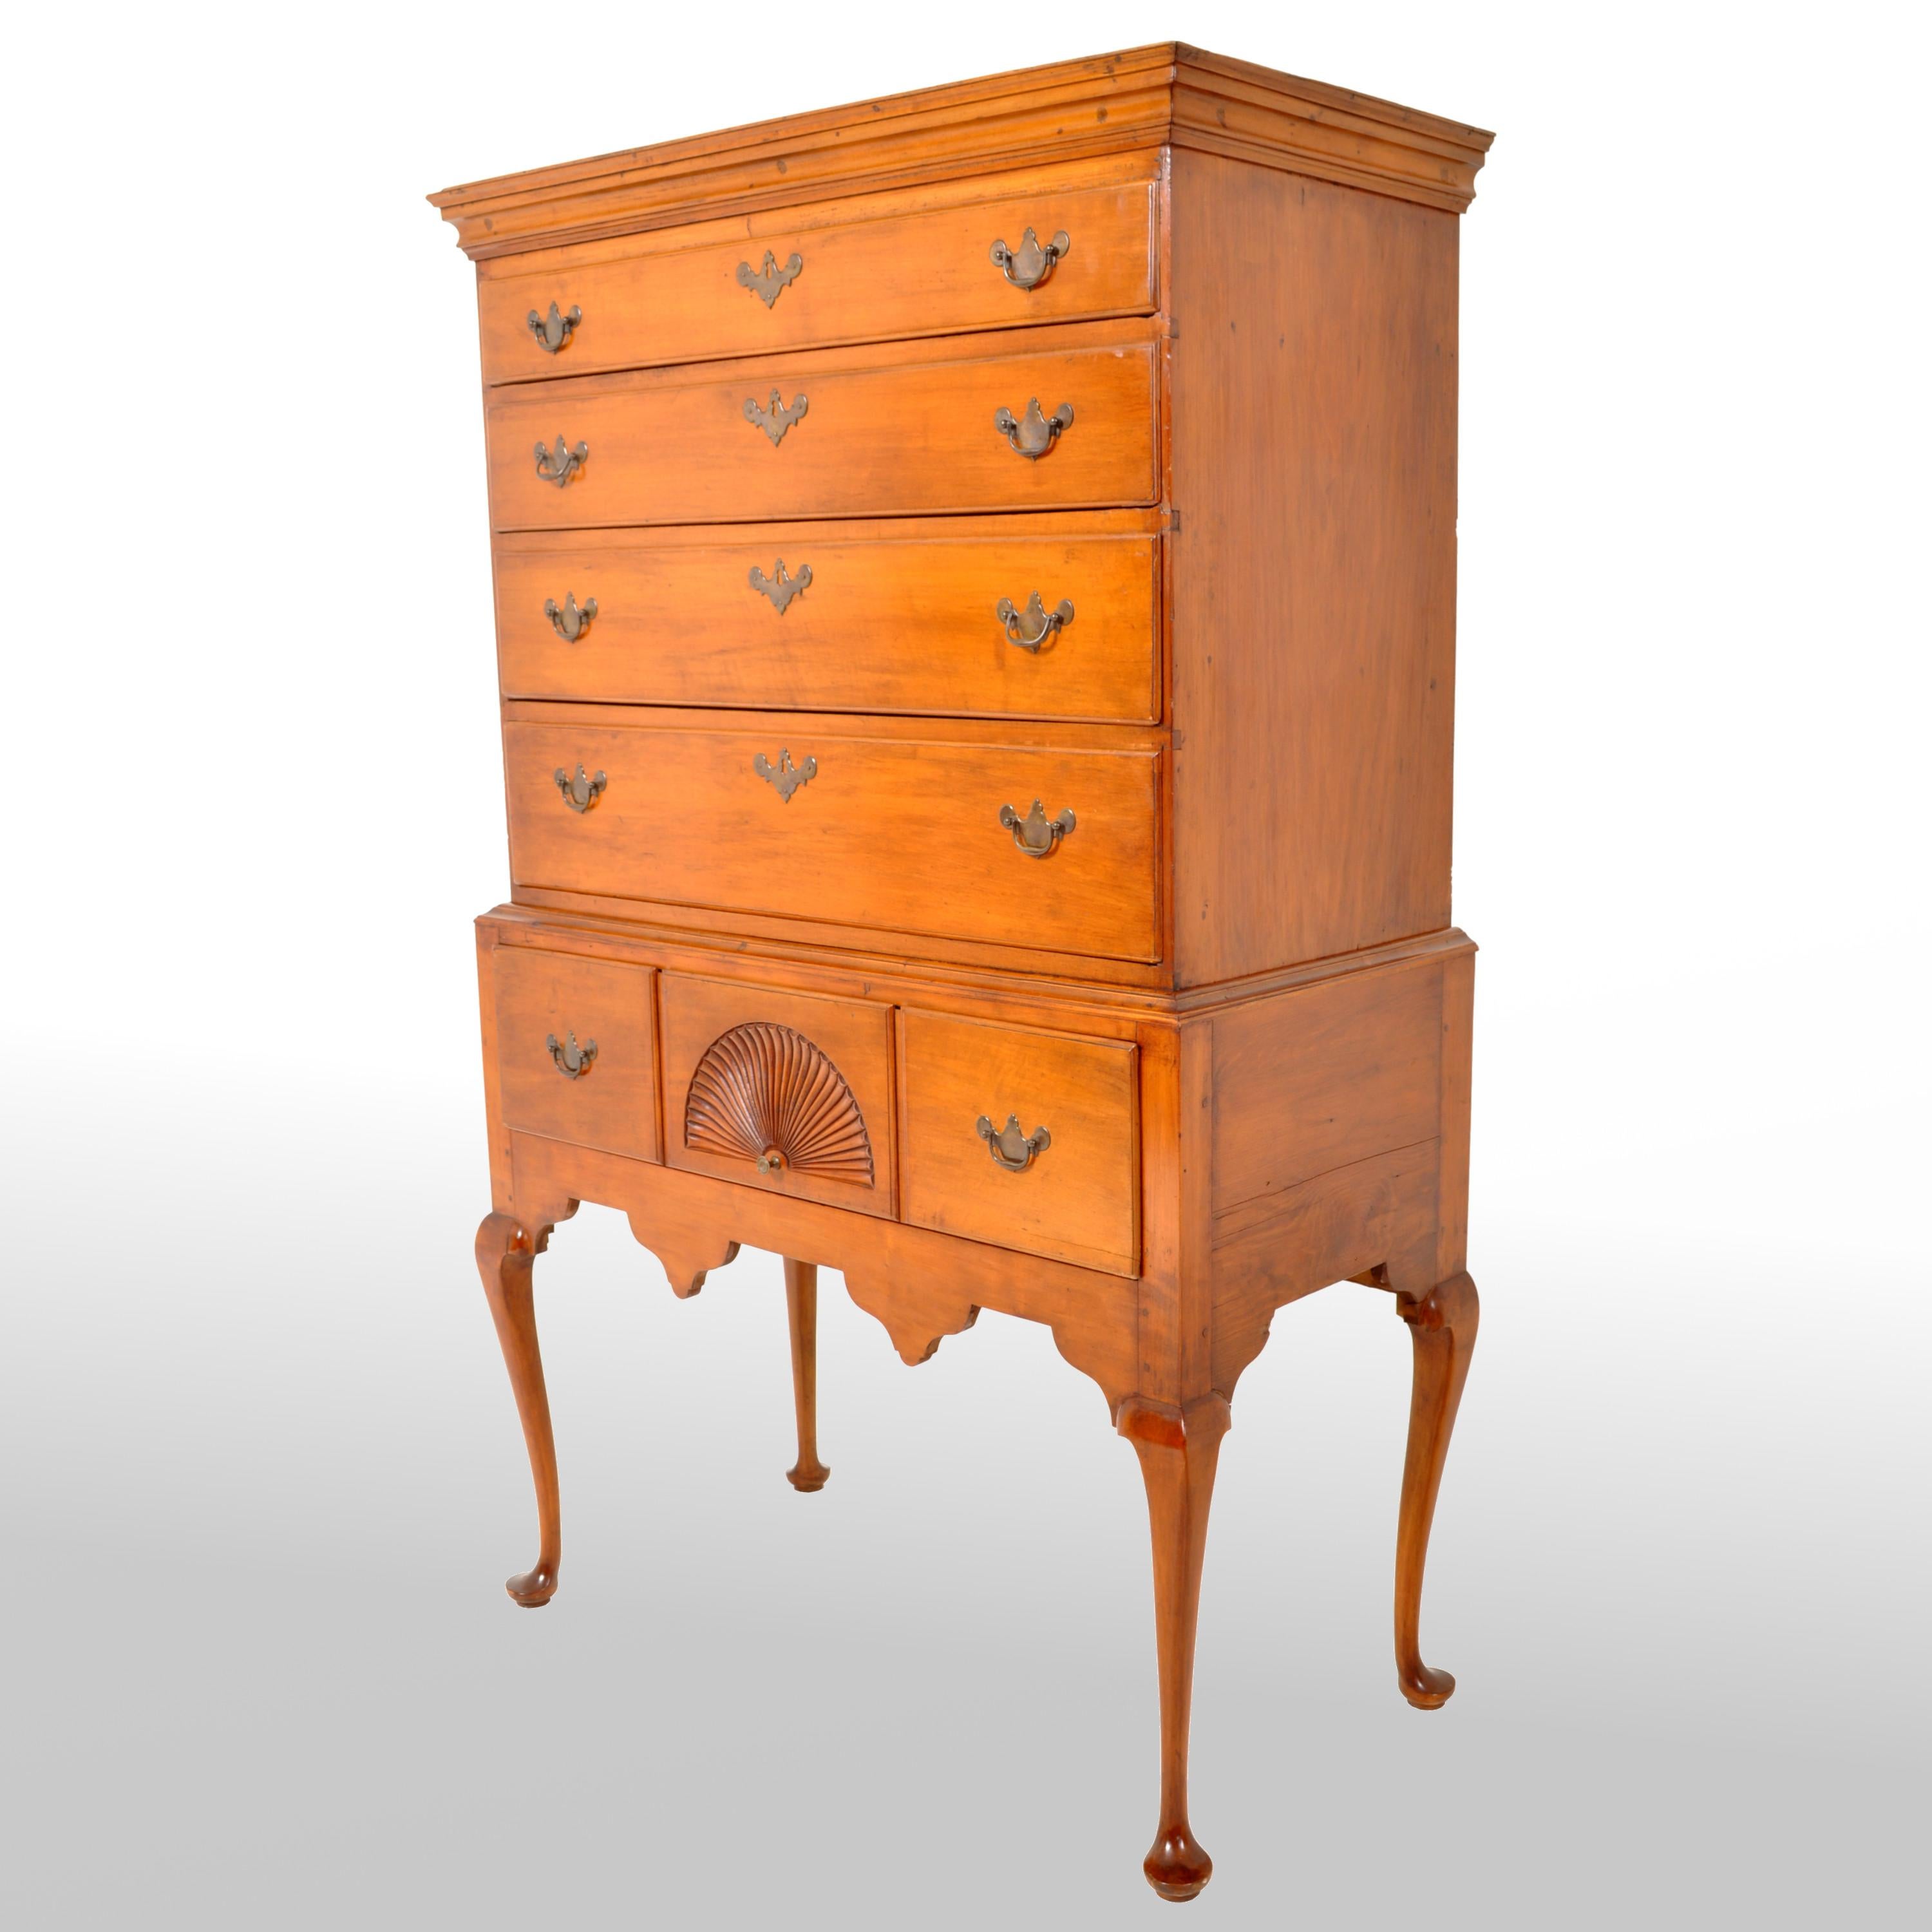 A fine antique American maple highboy or chest on stand, Connecticut, circa 1760. The highboy in two sections, the top having a graduated set of four drawers fitted with brass 'batwing' handles and escutcheons. The base having a pair of drawers